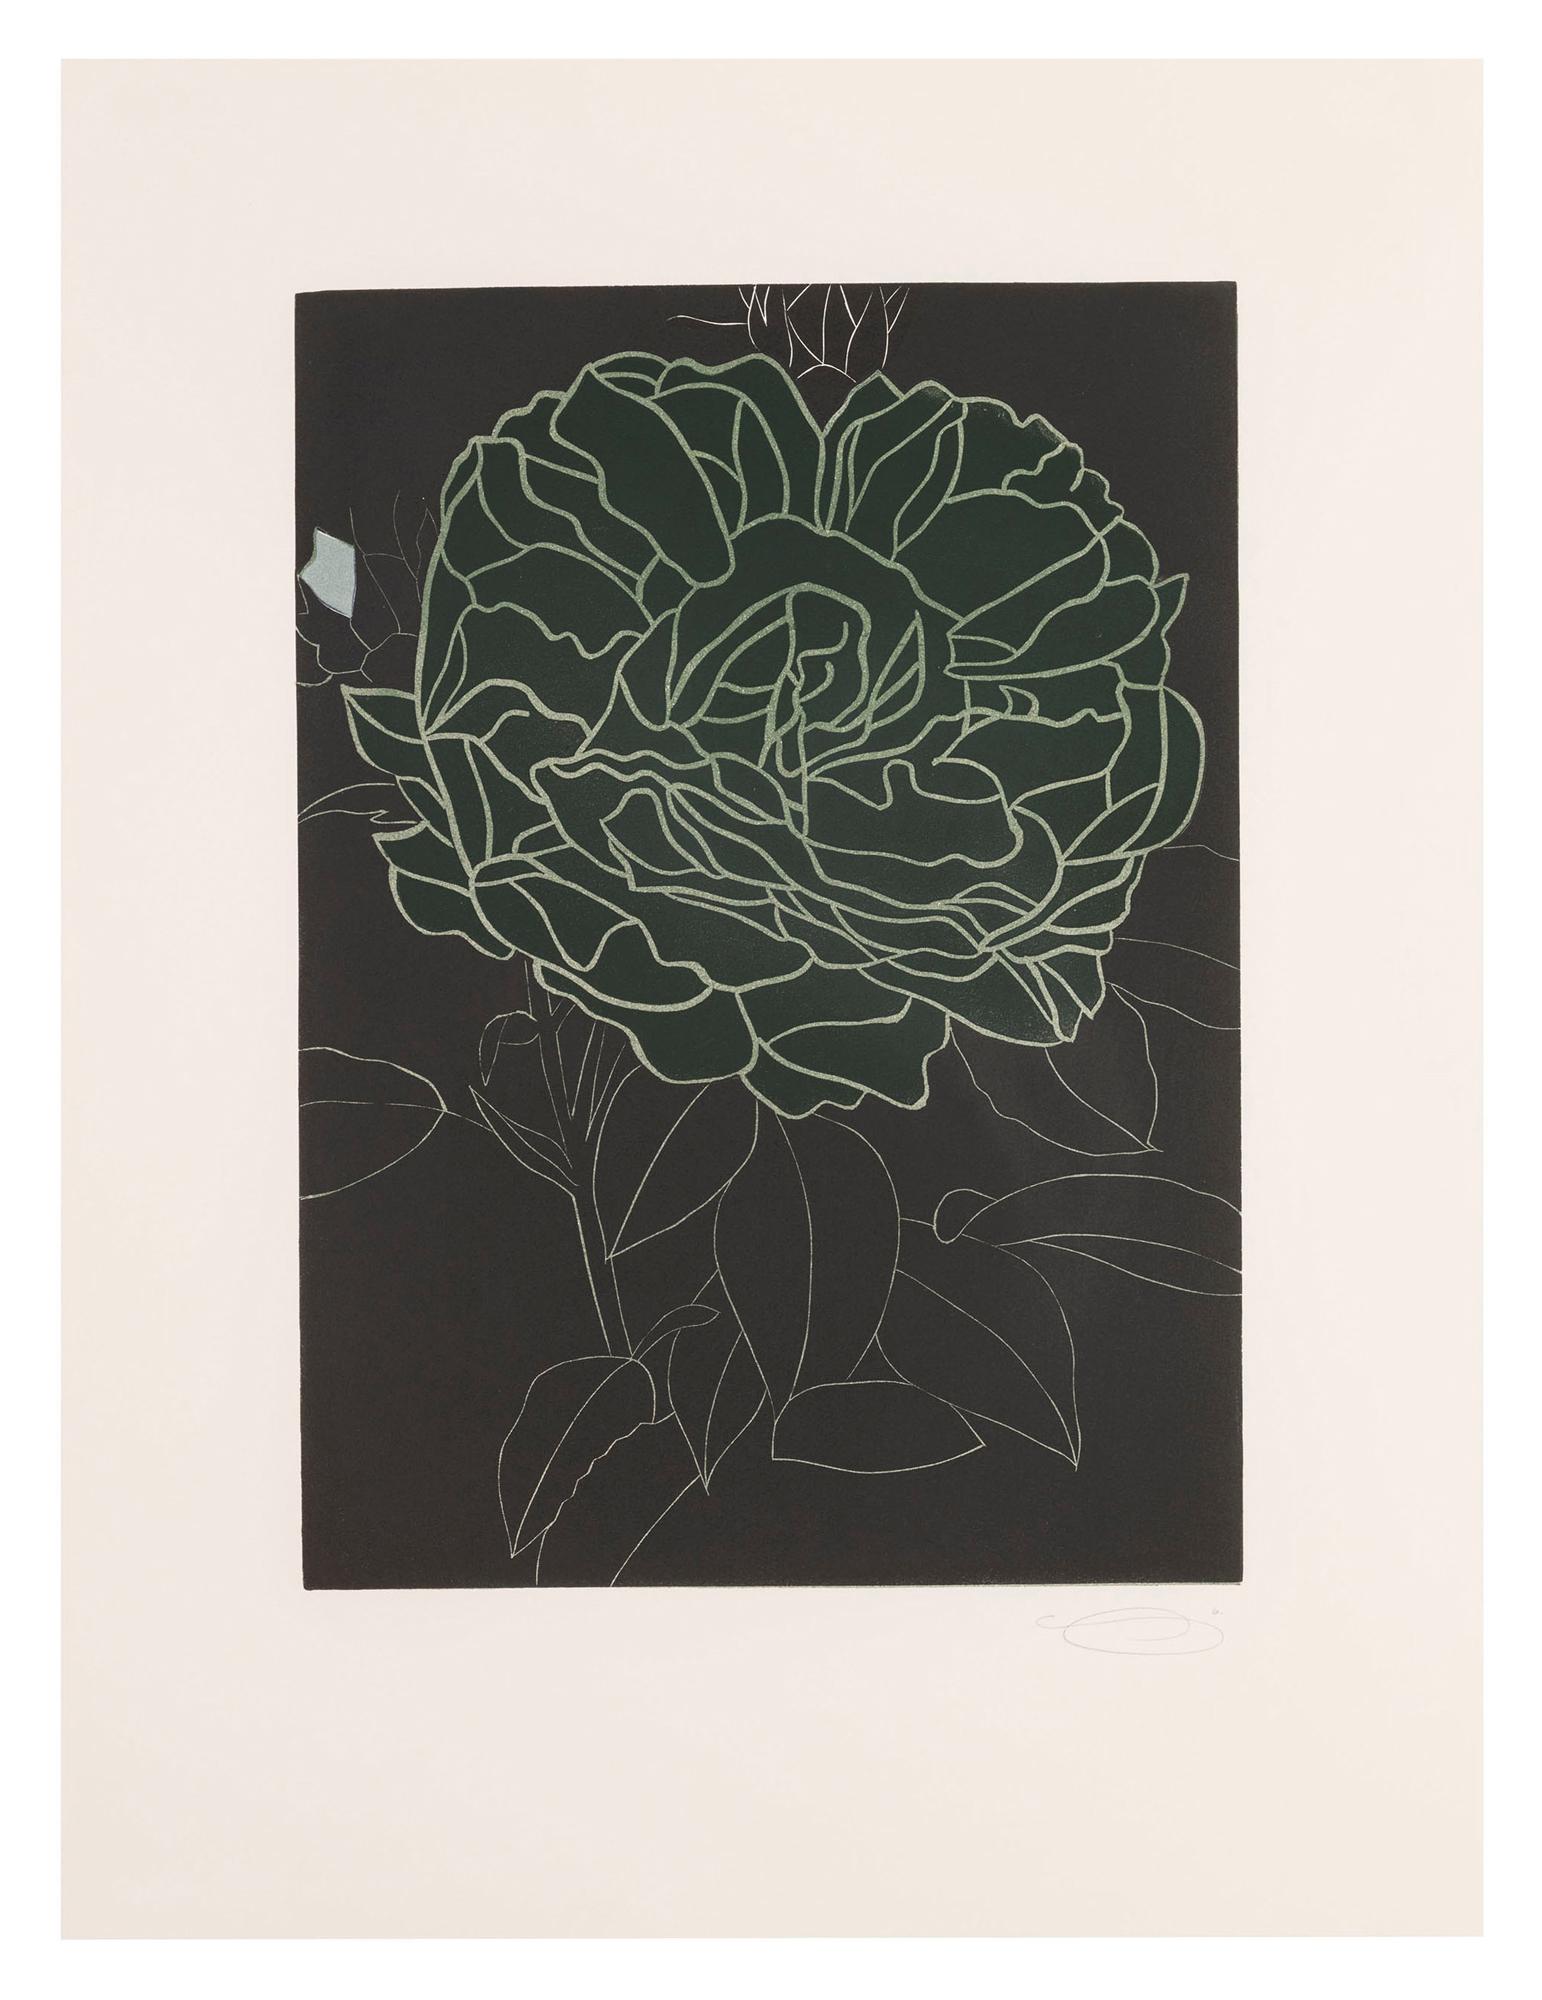 Here's Flowers - Contemporary Art by Gary Hume